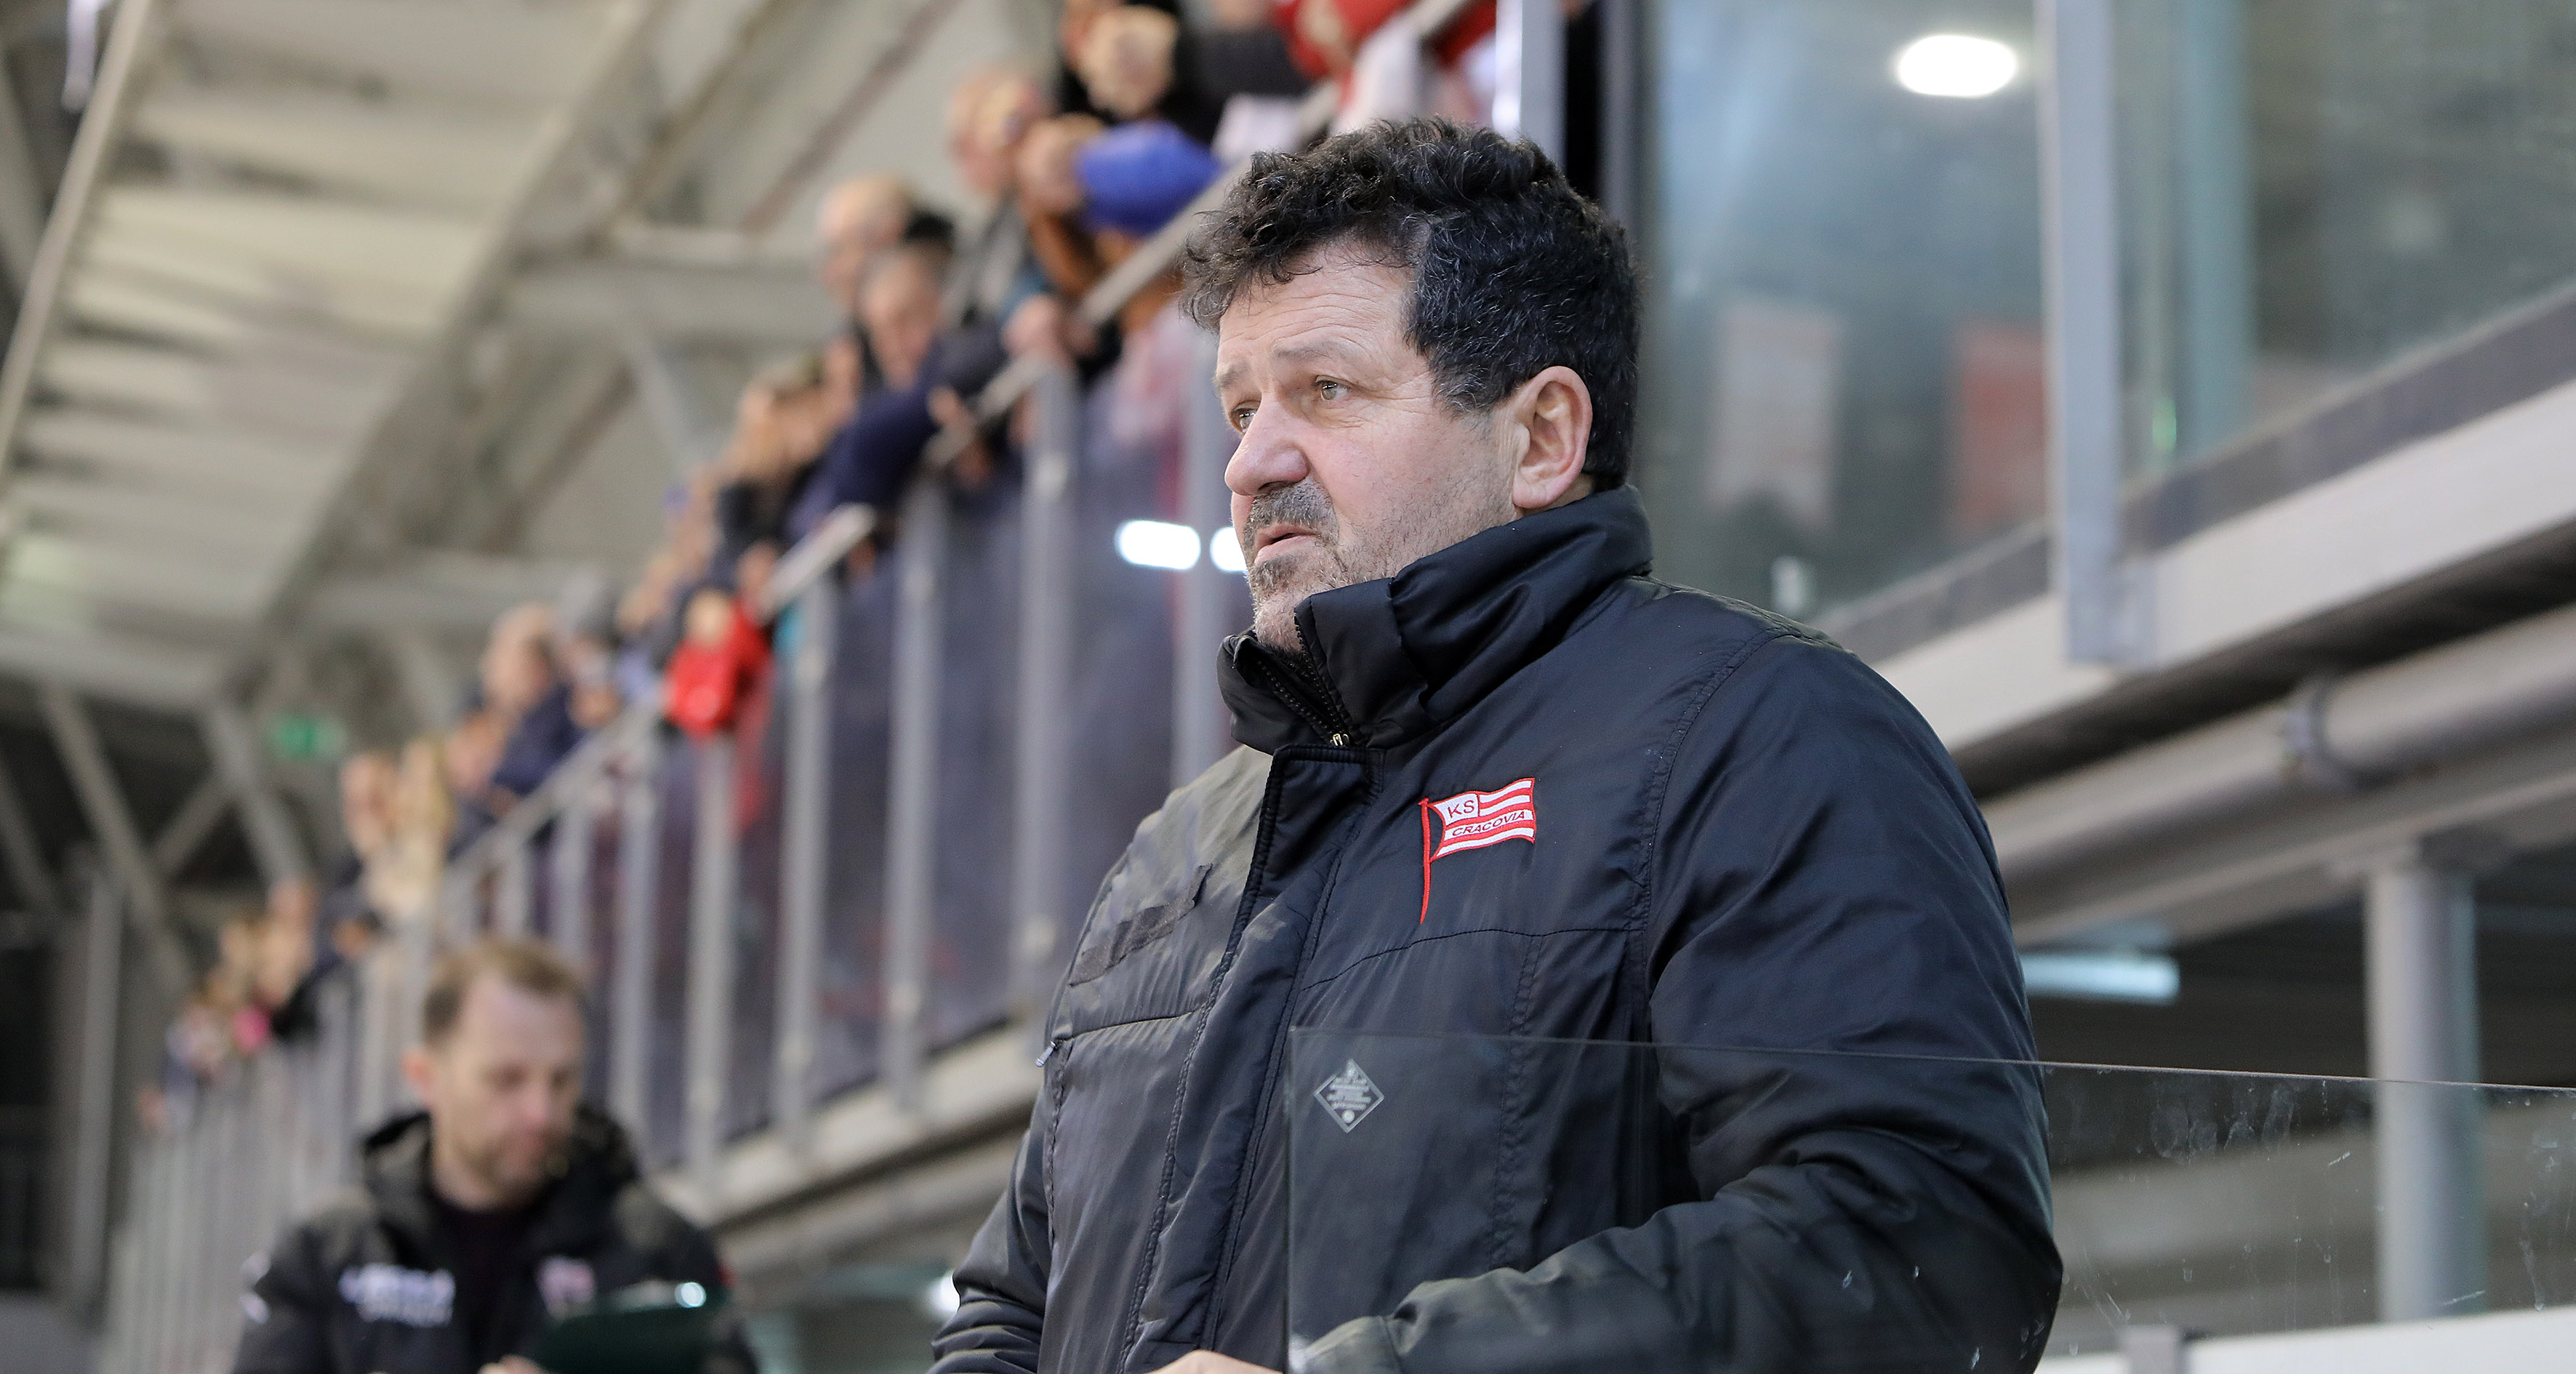 RUDOLF ROHÁČEK: OUR WIN WAS DECIDED BY THE TEAM GAME